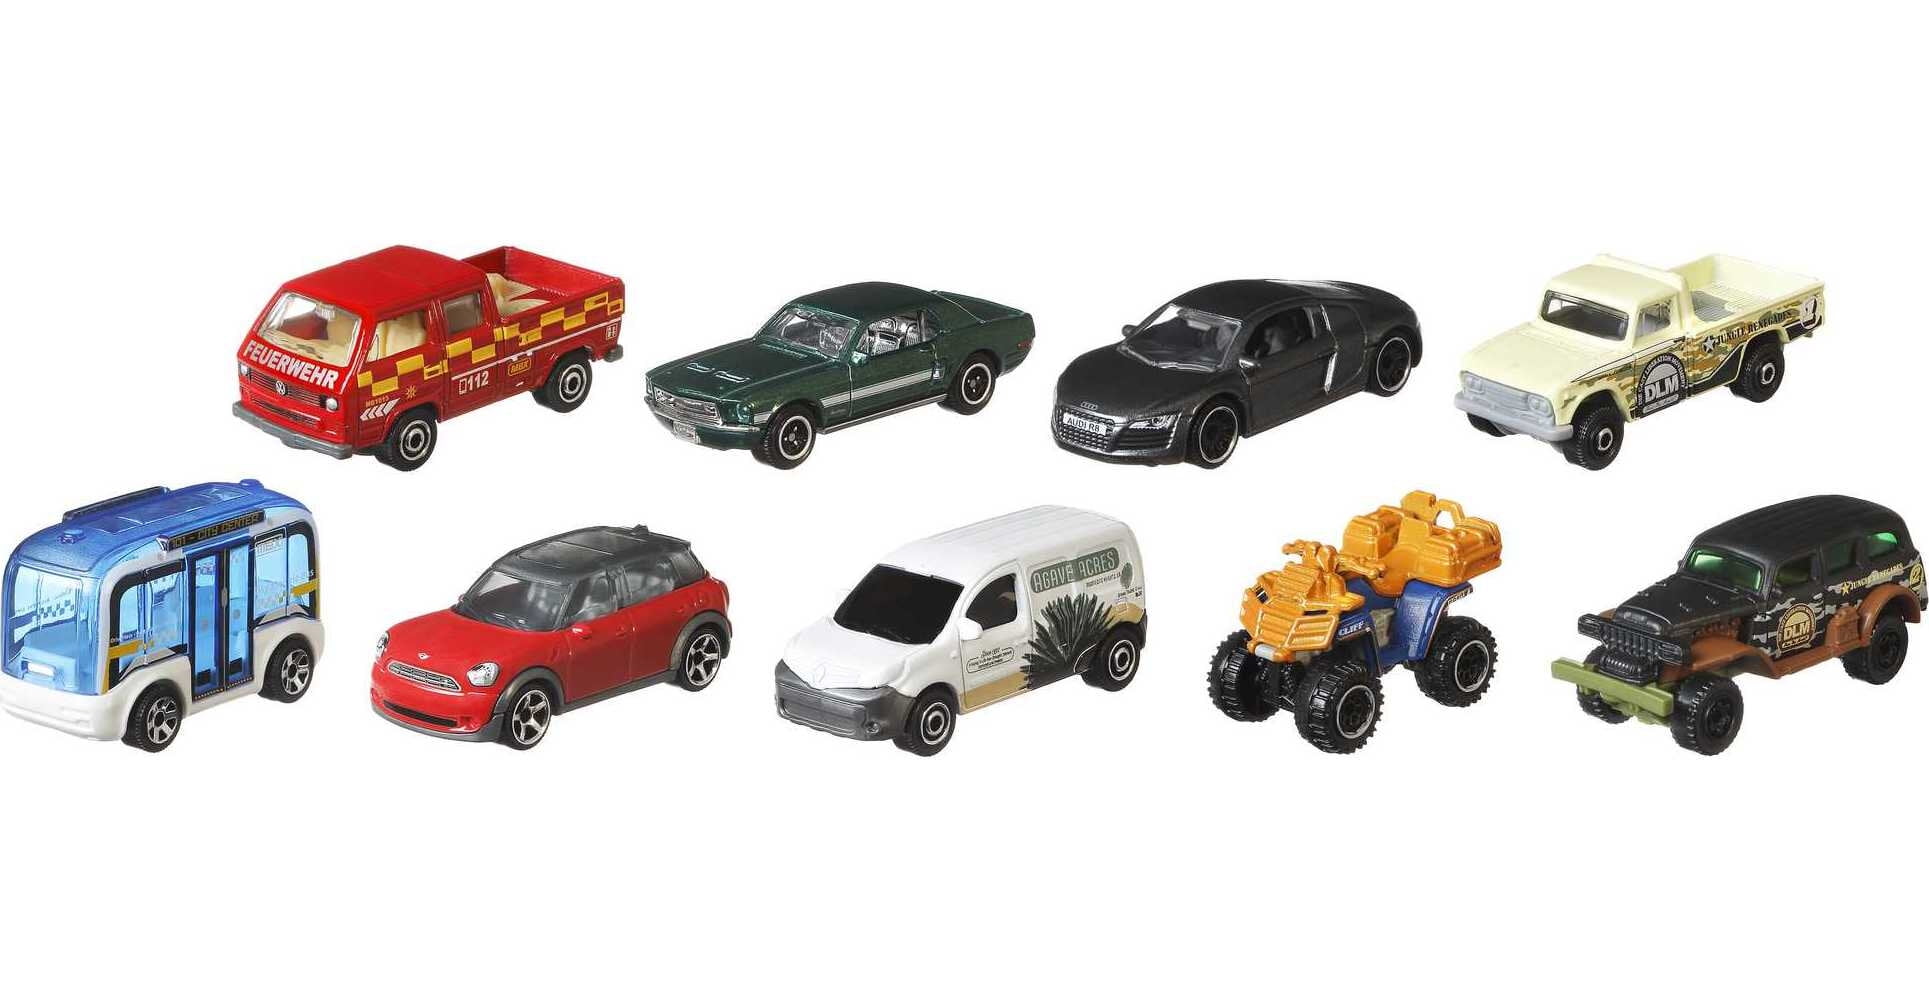 9-Pack Matchbox Toy Car Collection (Styles May Vary, 1:64 Scale) $6.47 + Free S&H w/ Walmart+ or $35+